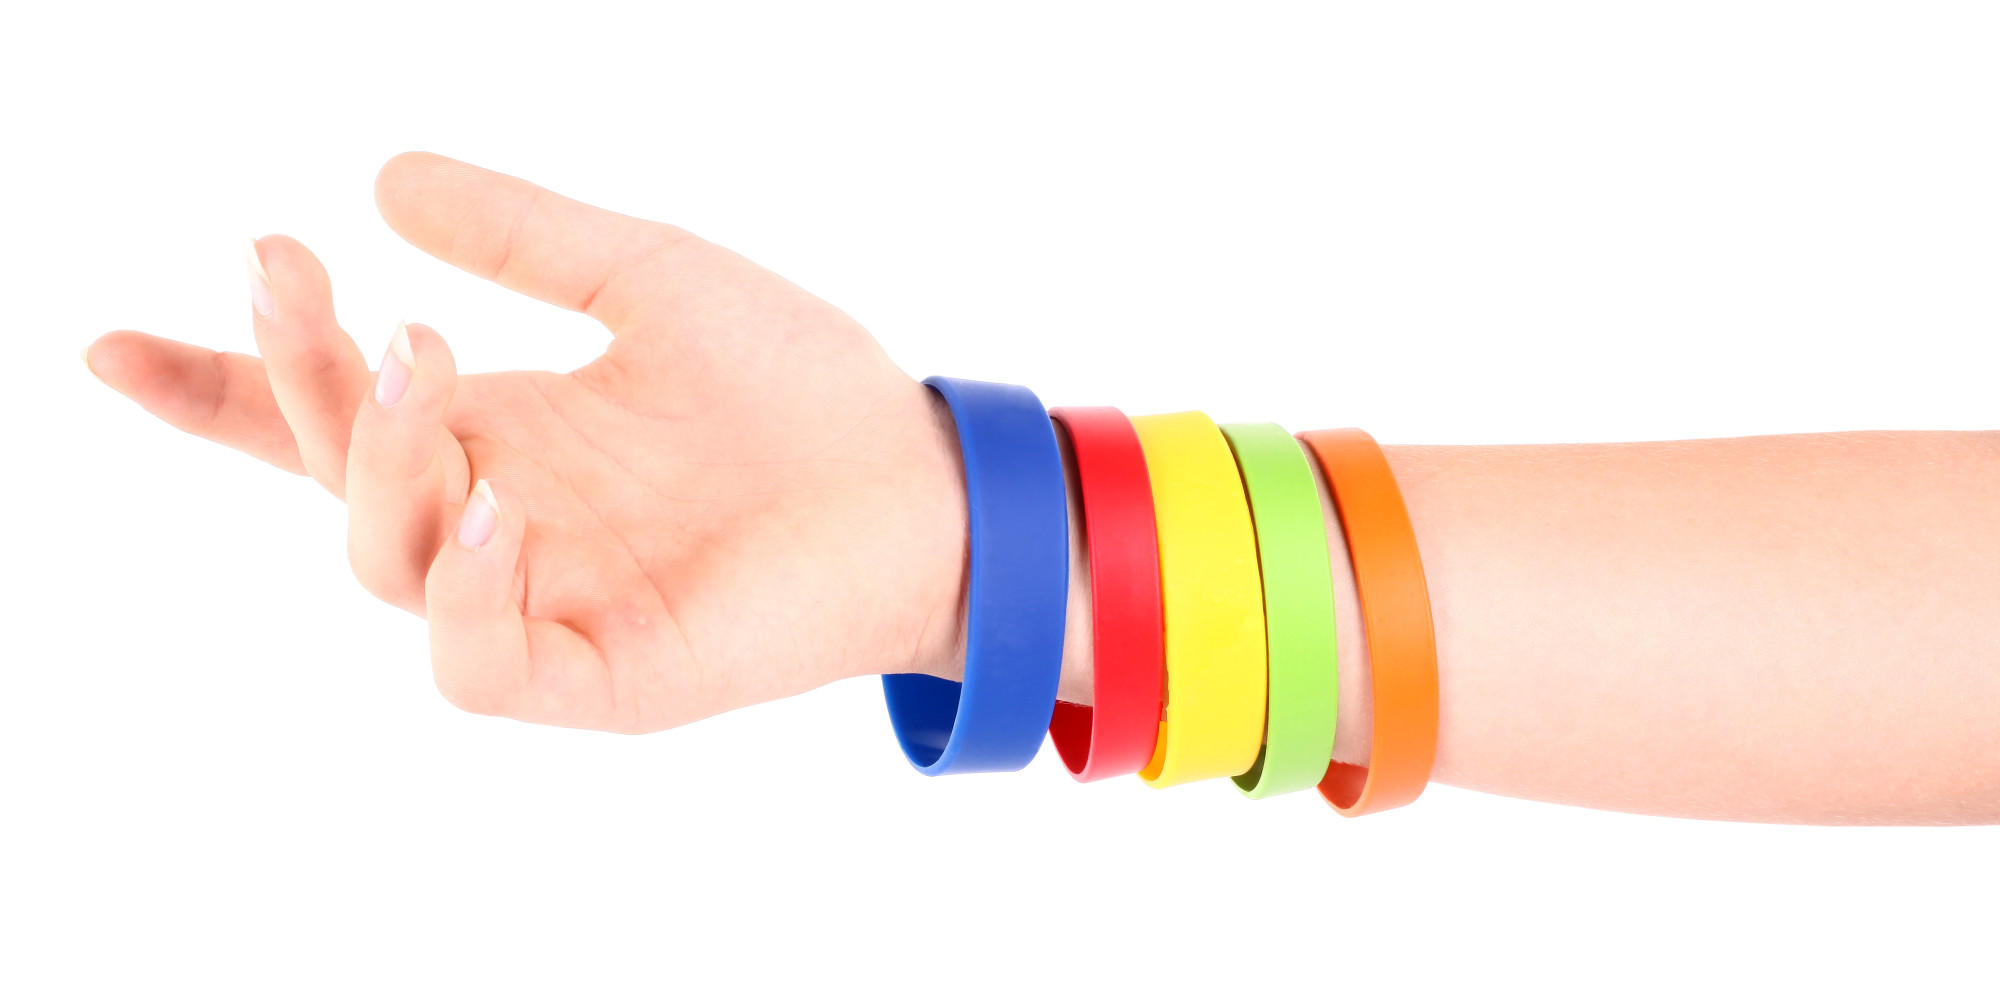 How to Easily Make Custom Silicone Bracelets  Create Your Own Custom  Wristband Today  YouTube